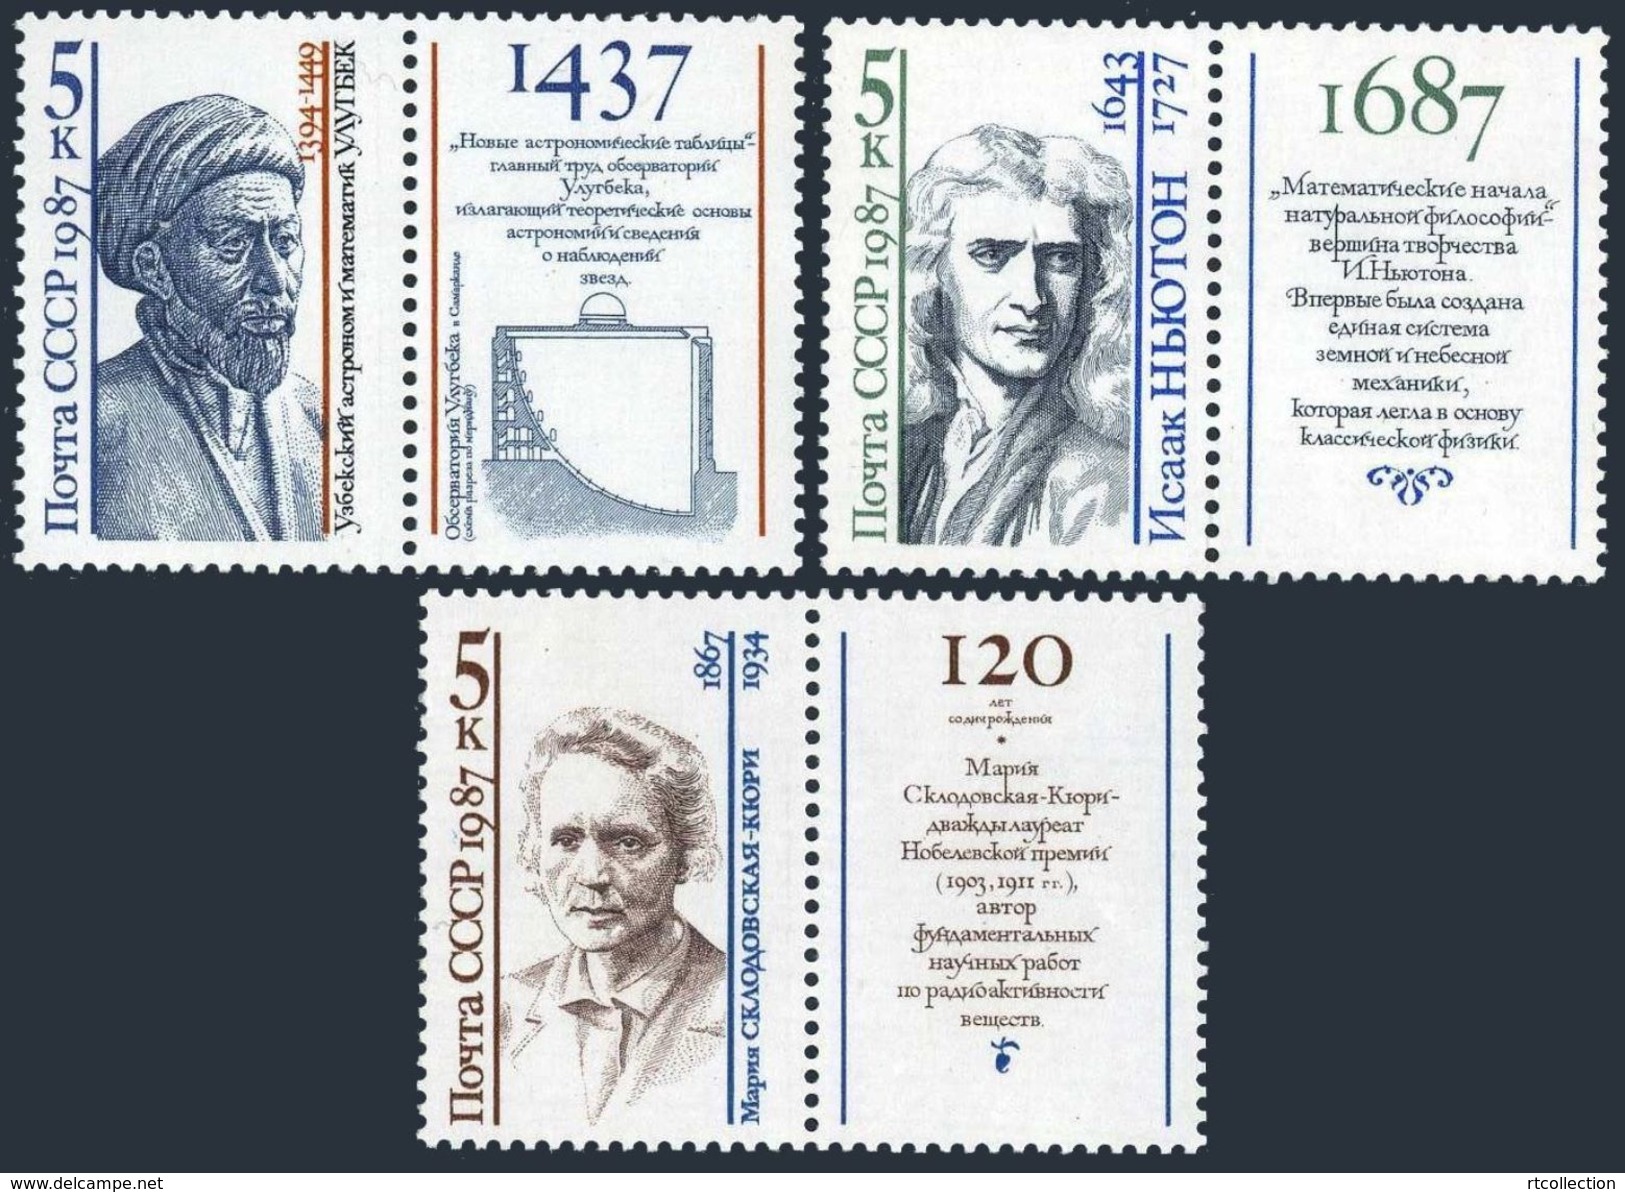 USSR Russia 1987 Scientists Sciences Muhammed Isaac Newton Marie Curie Physicist Chemistry People Stamps MNH Mi 5757-59 - Chemistry